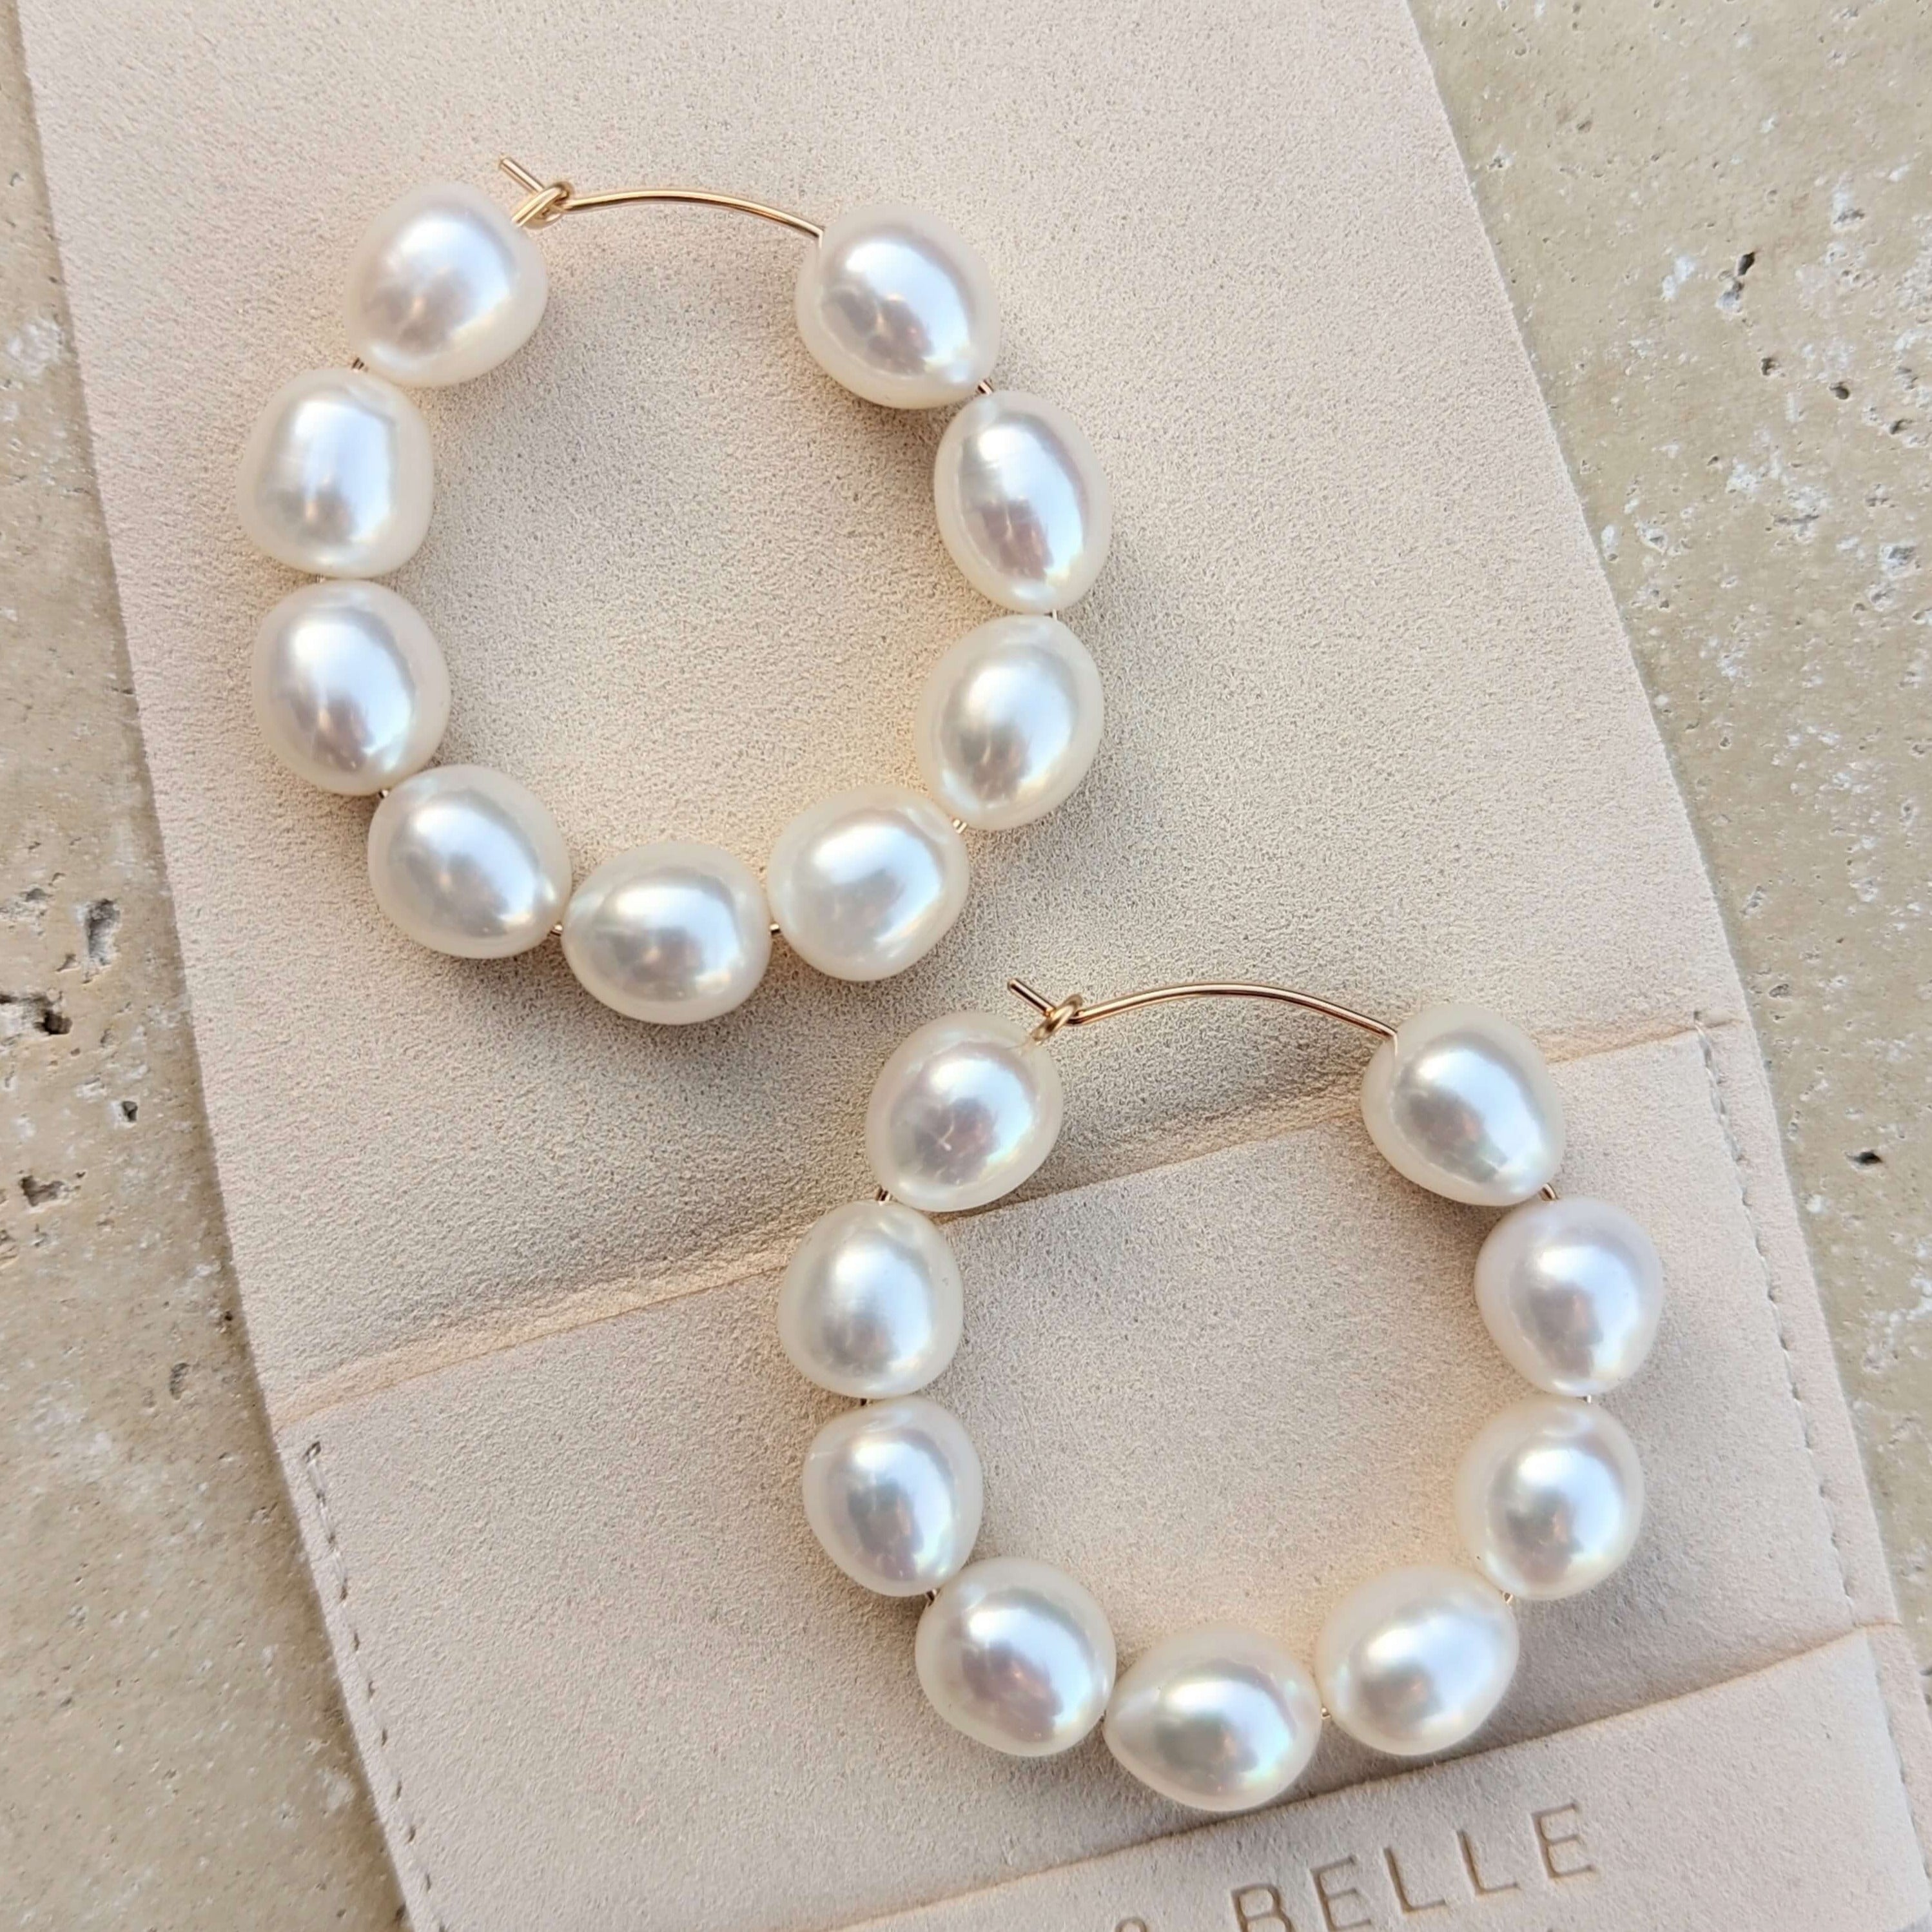 large pearl hoop earrings in gold filled on suede pouch